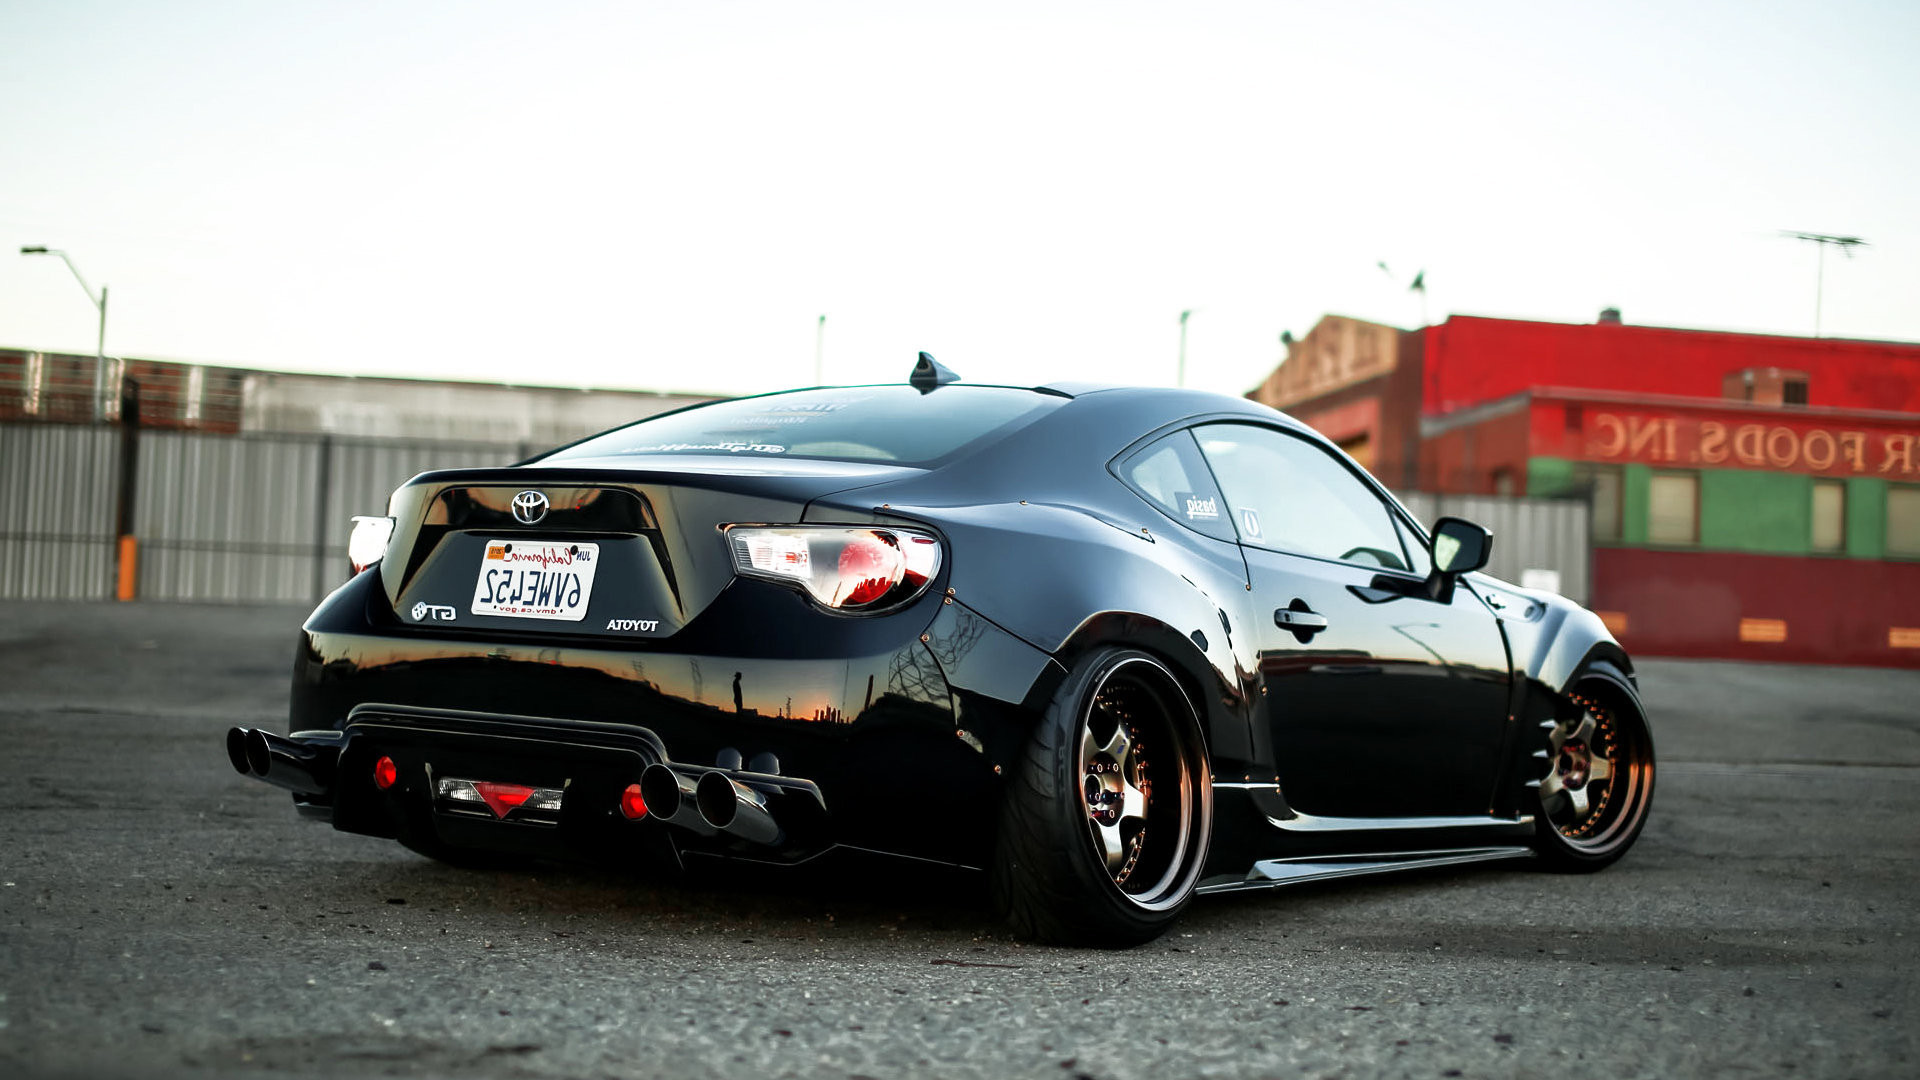 Scion FRS with Work Meisters and bodykit Rocket Bunny kits